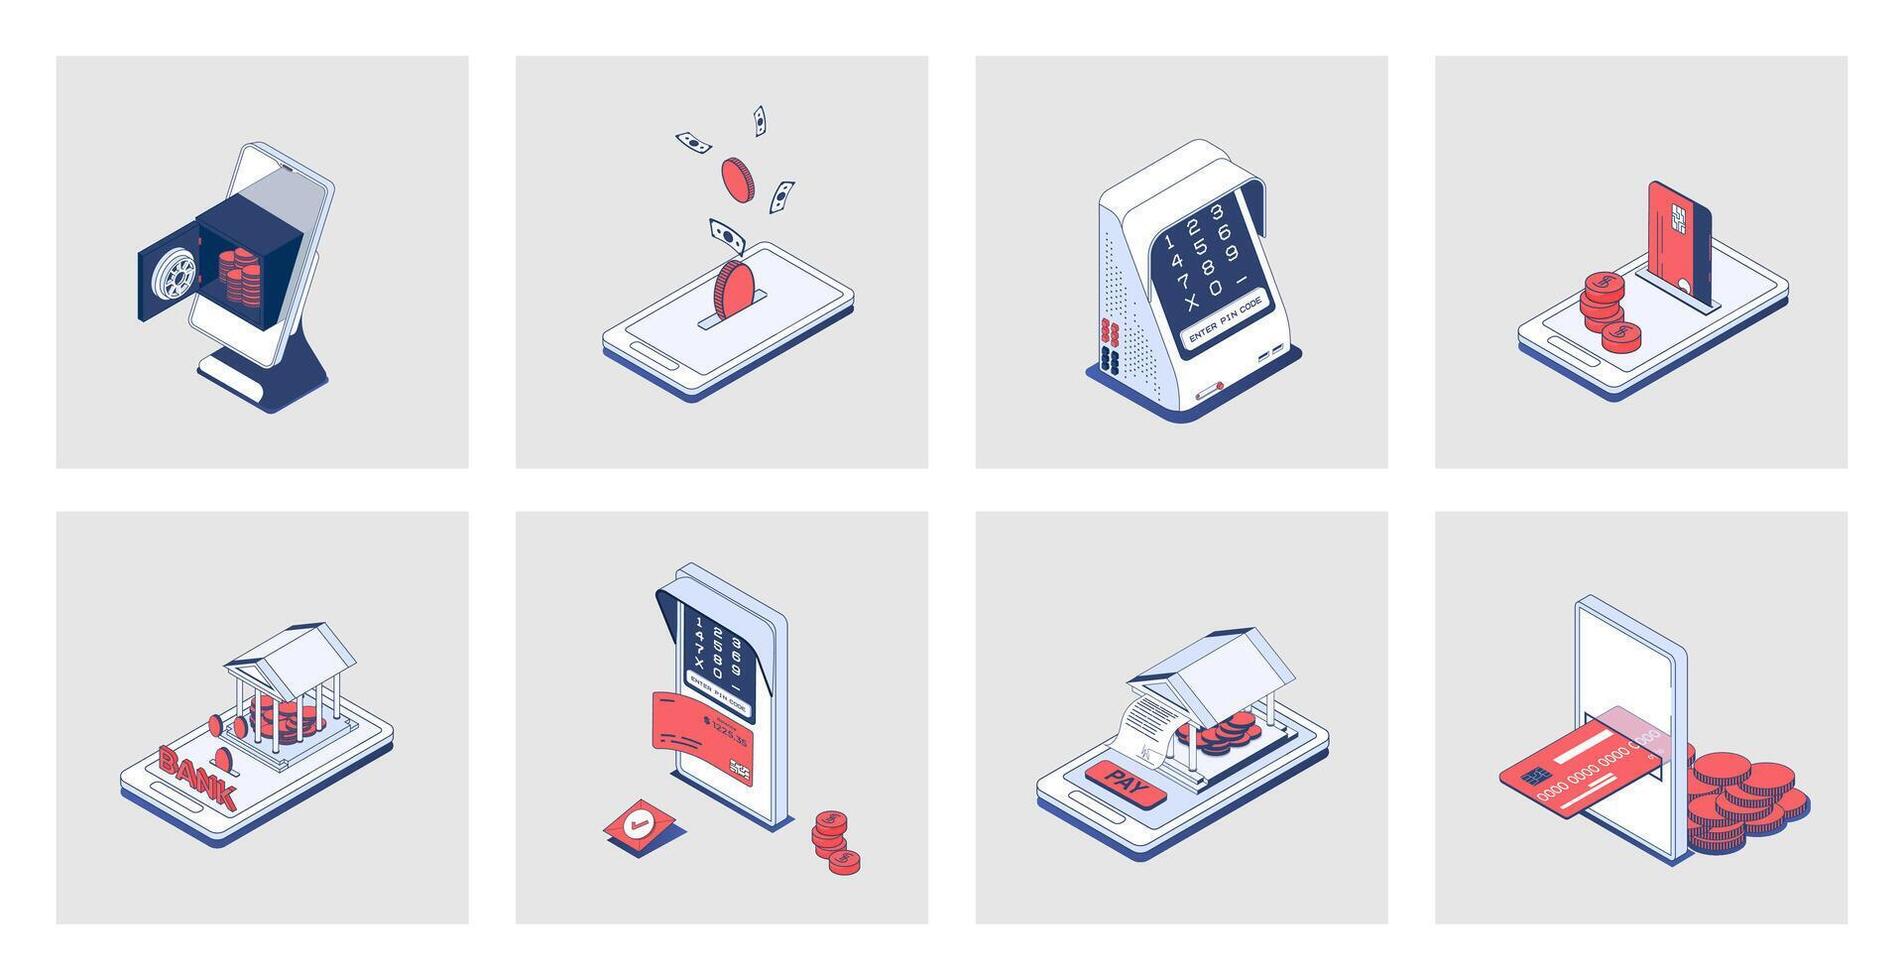 Mobile banking concept of isometric icons in 3d isometry design for web. Online payment, saving money in bank safe, financial management in app, electronic wallet transactions. Vector illustration